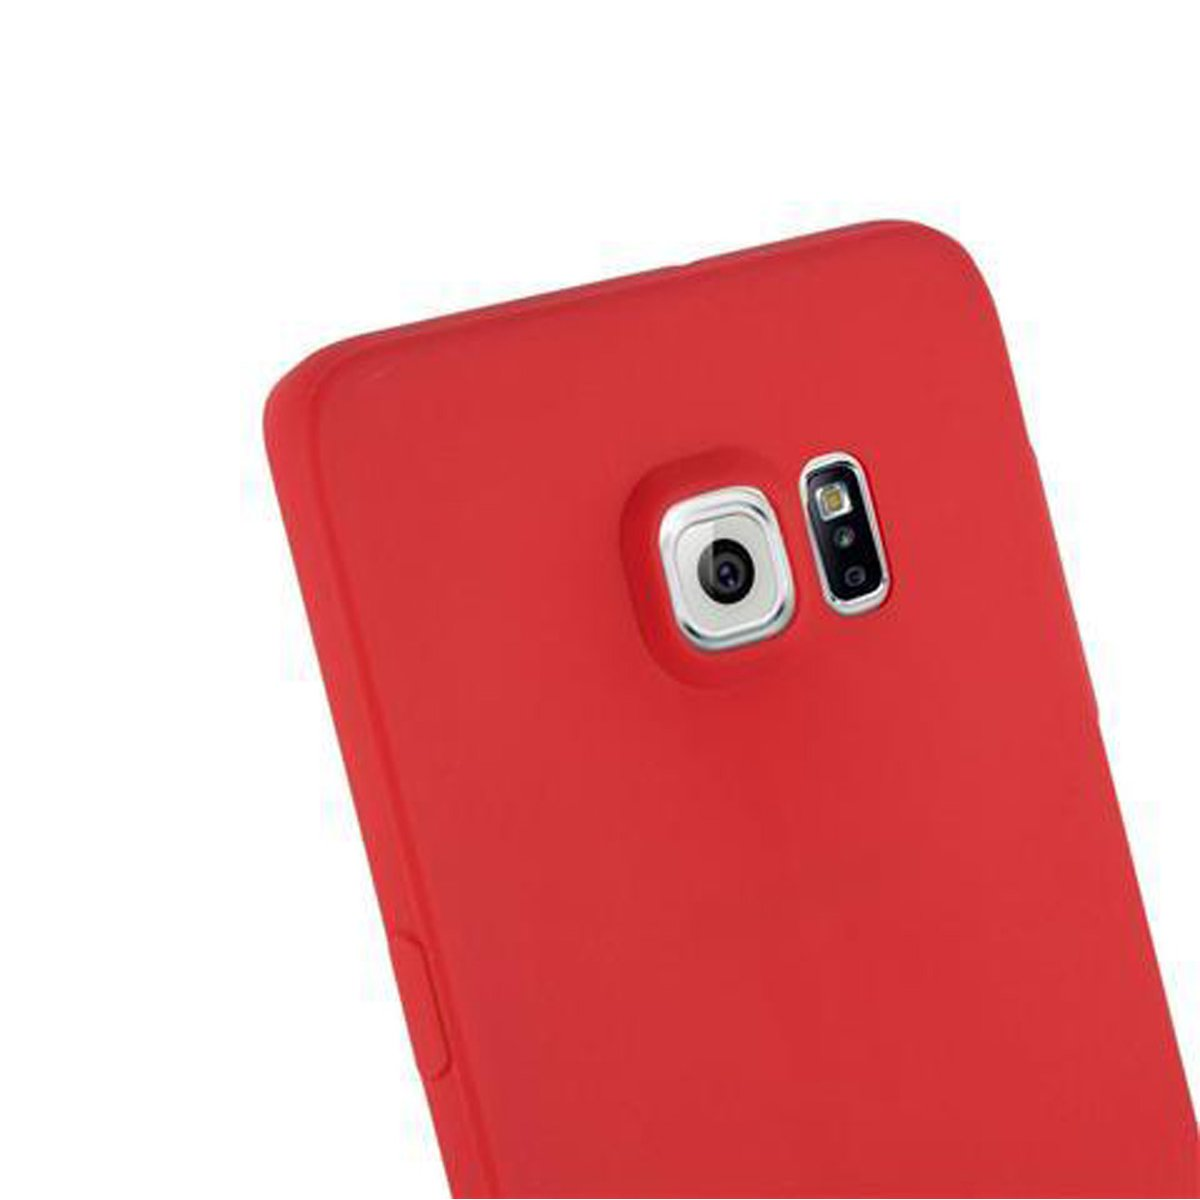 Backcover, CADORABO CANDY Samsung, Hülle Style, im Galaxy EDGE PLUS, TPU S6 Candy ROT